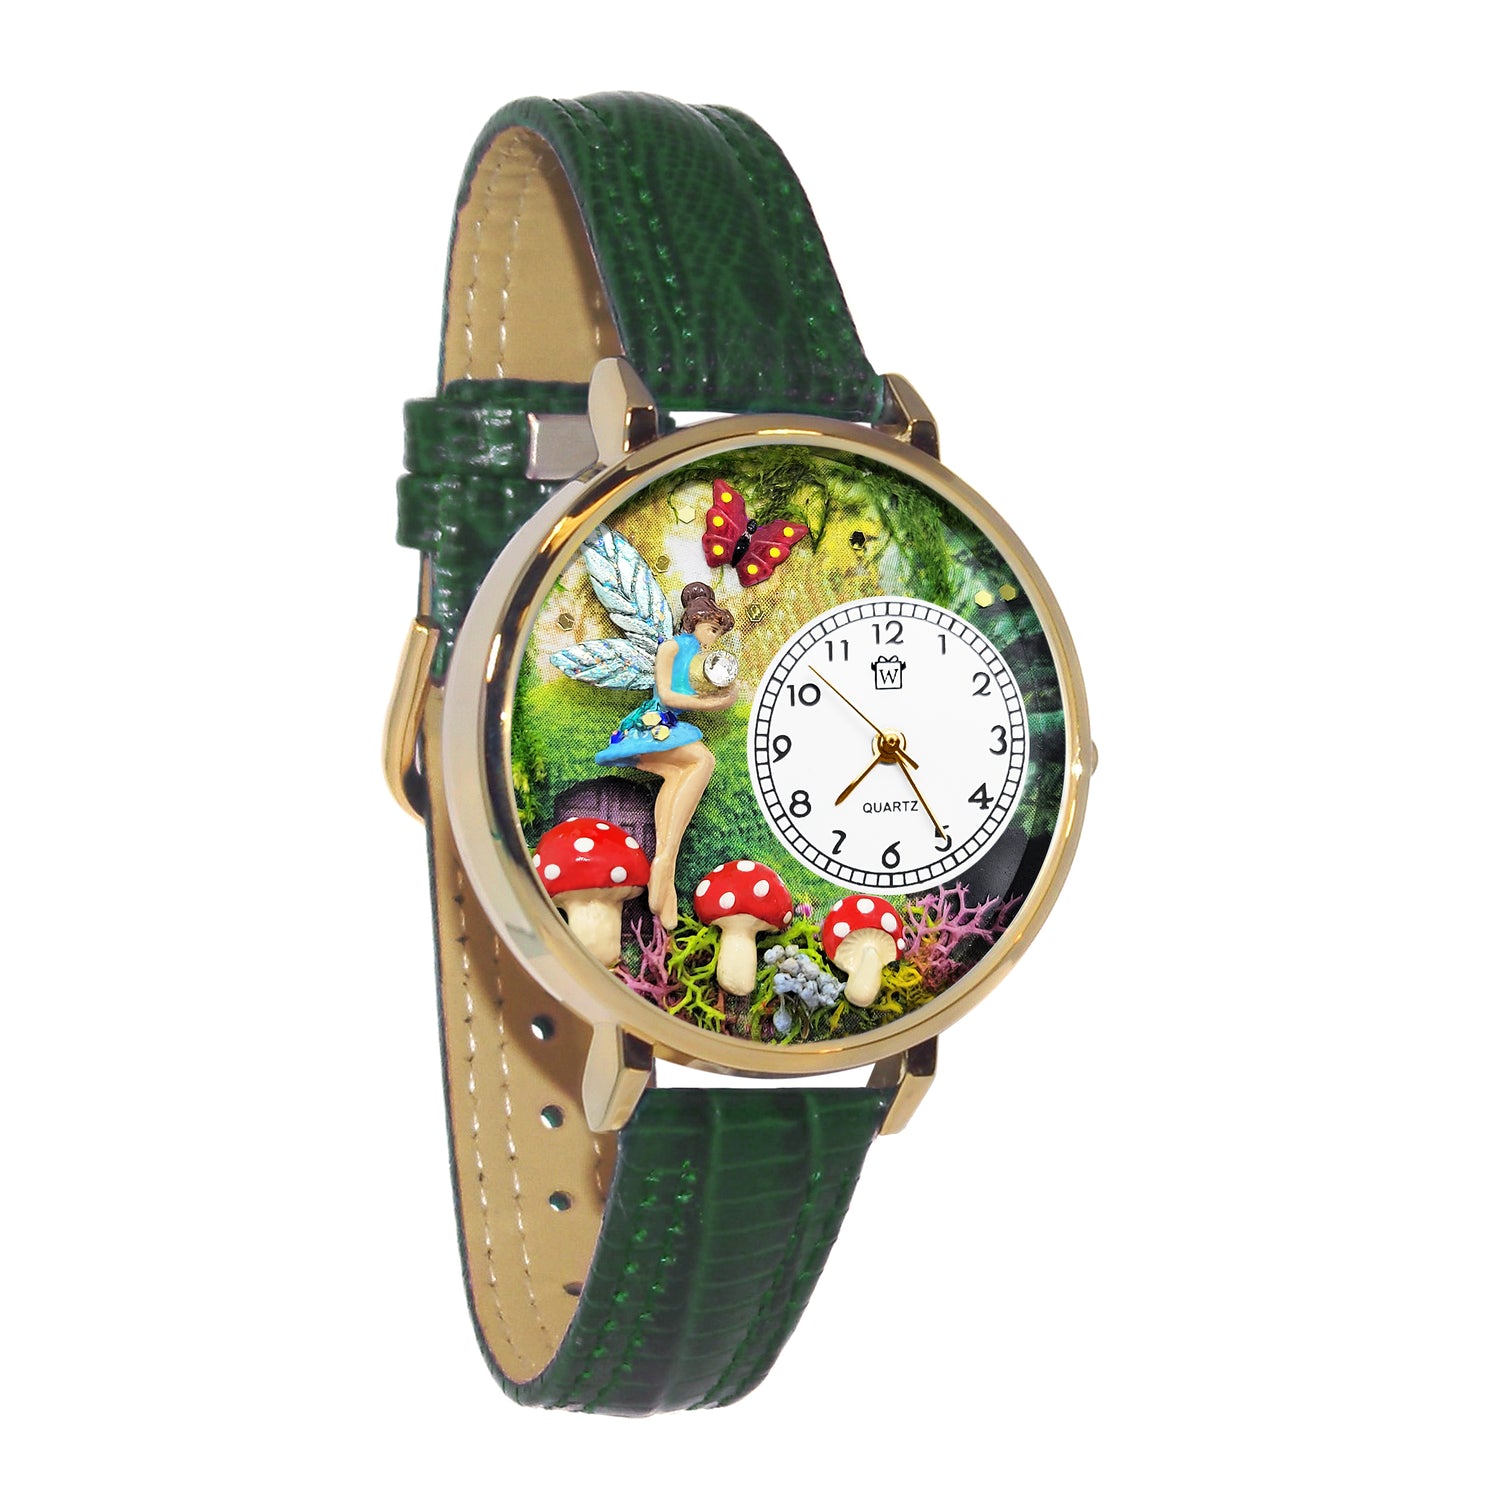 Whimsical Gifts | Fairy 3D Watch Large Style | Handmade in USA | Fantasy & Mystical |  | Novelty Unique Fun Miniatures Gift | Gold Finish Green Leather Watch Band